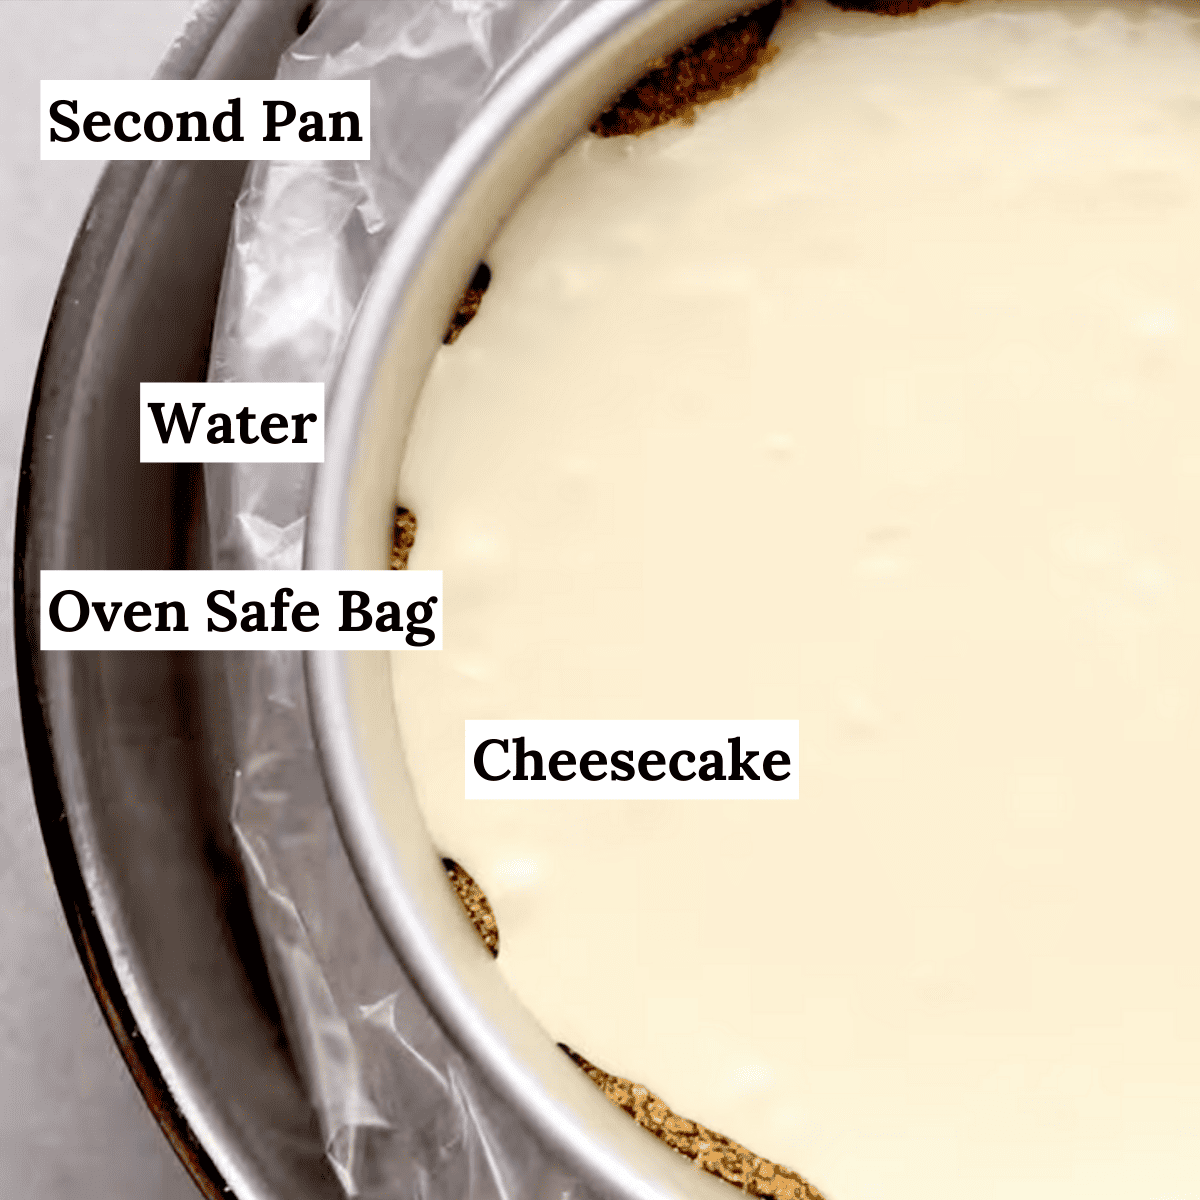 How to use regular pan for cheesecake?